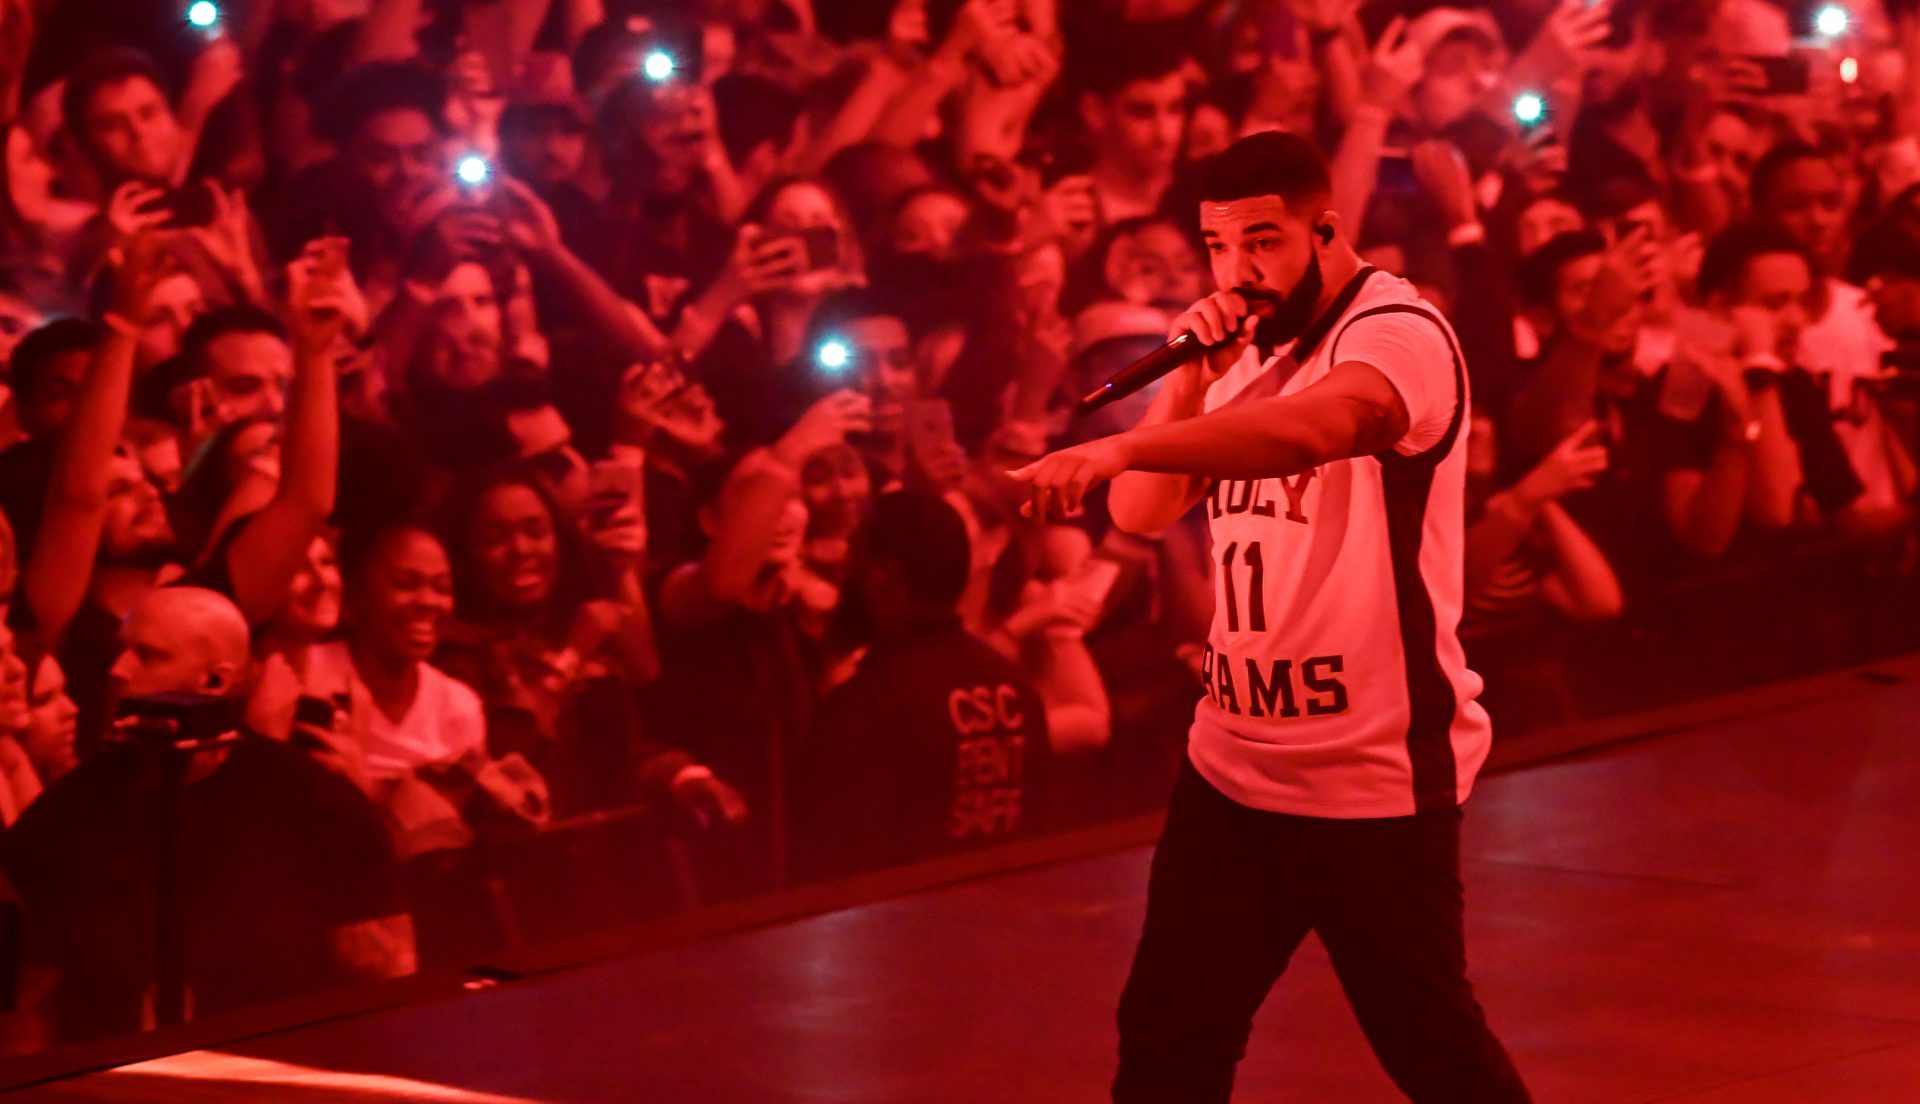 RapTV on X: Drake receives largest bra while on stage 😳‼️ https